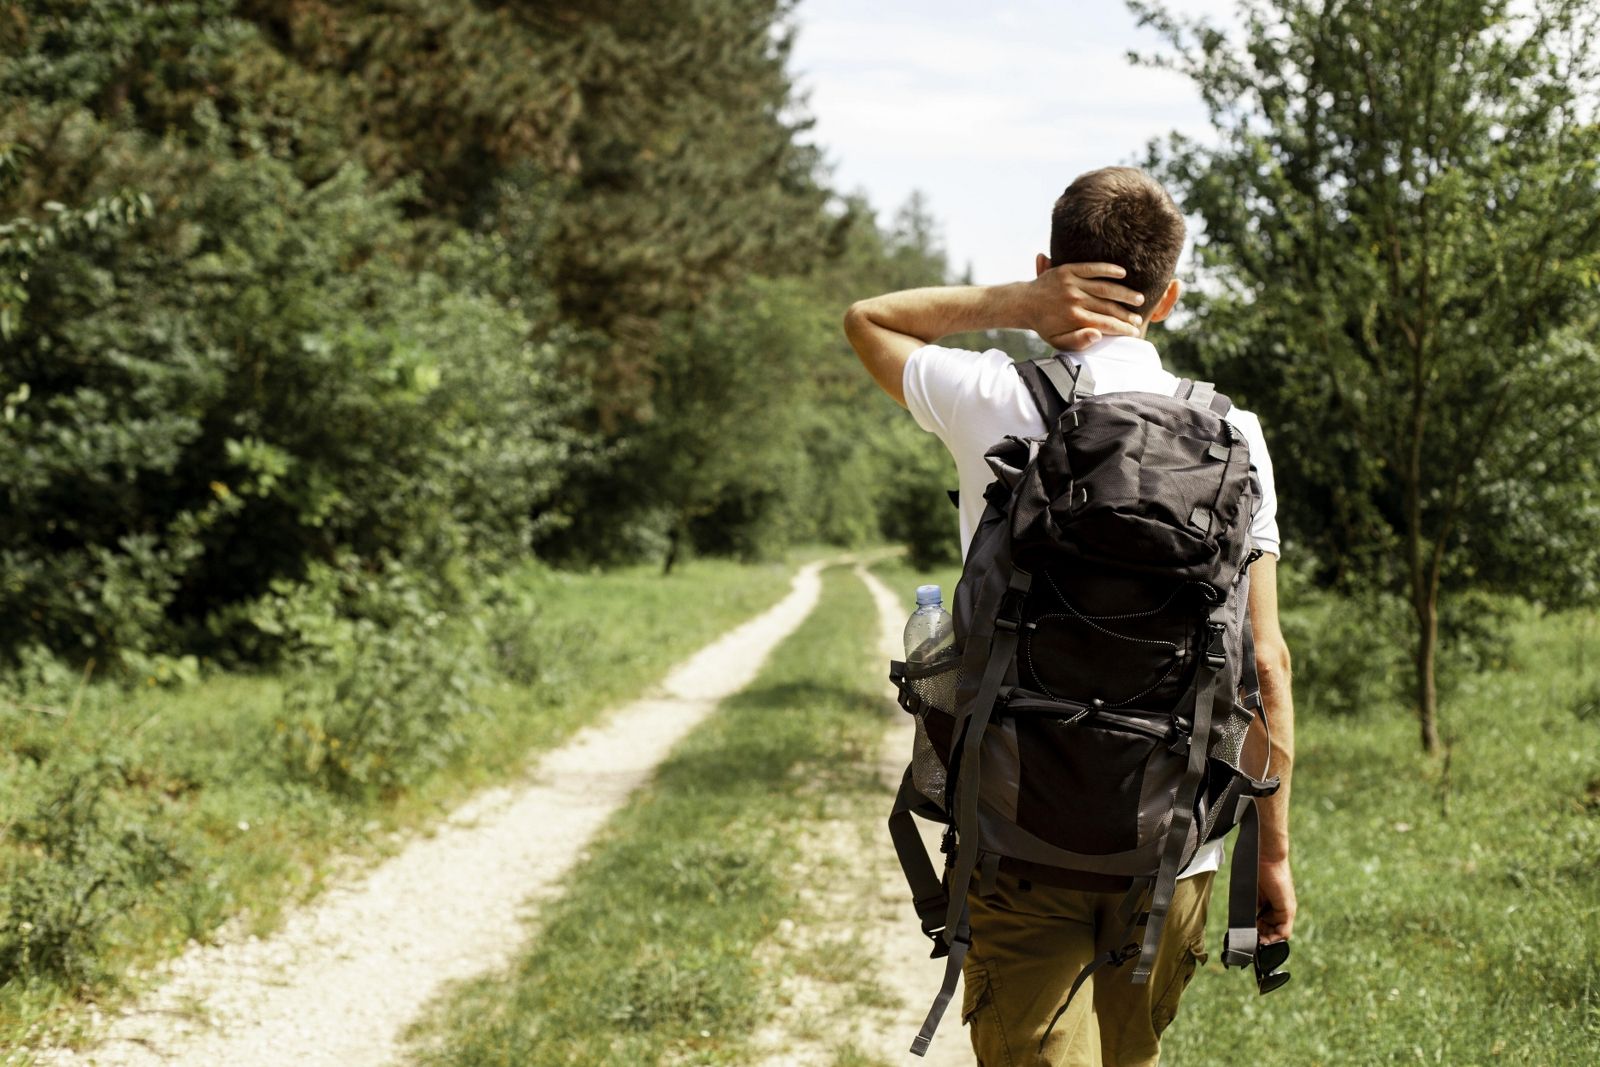 man-with-backpack-exploring-nature_1600x1067.jpg